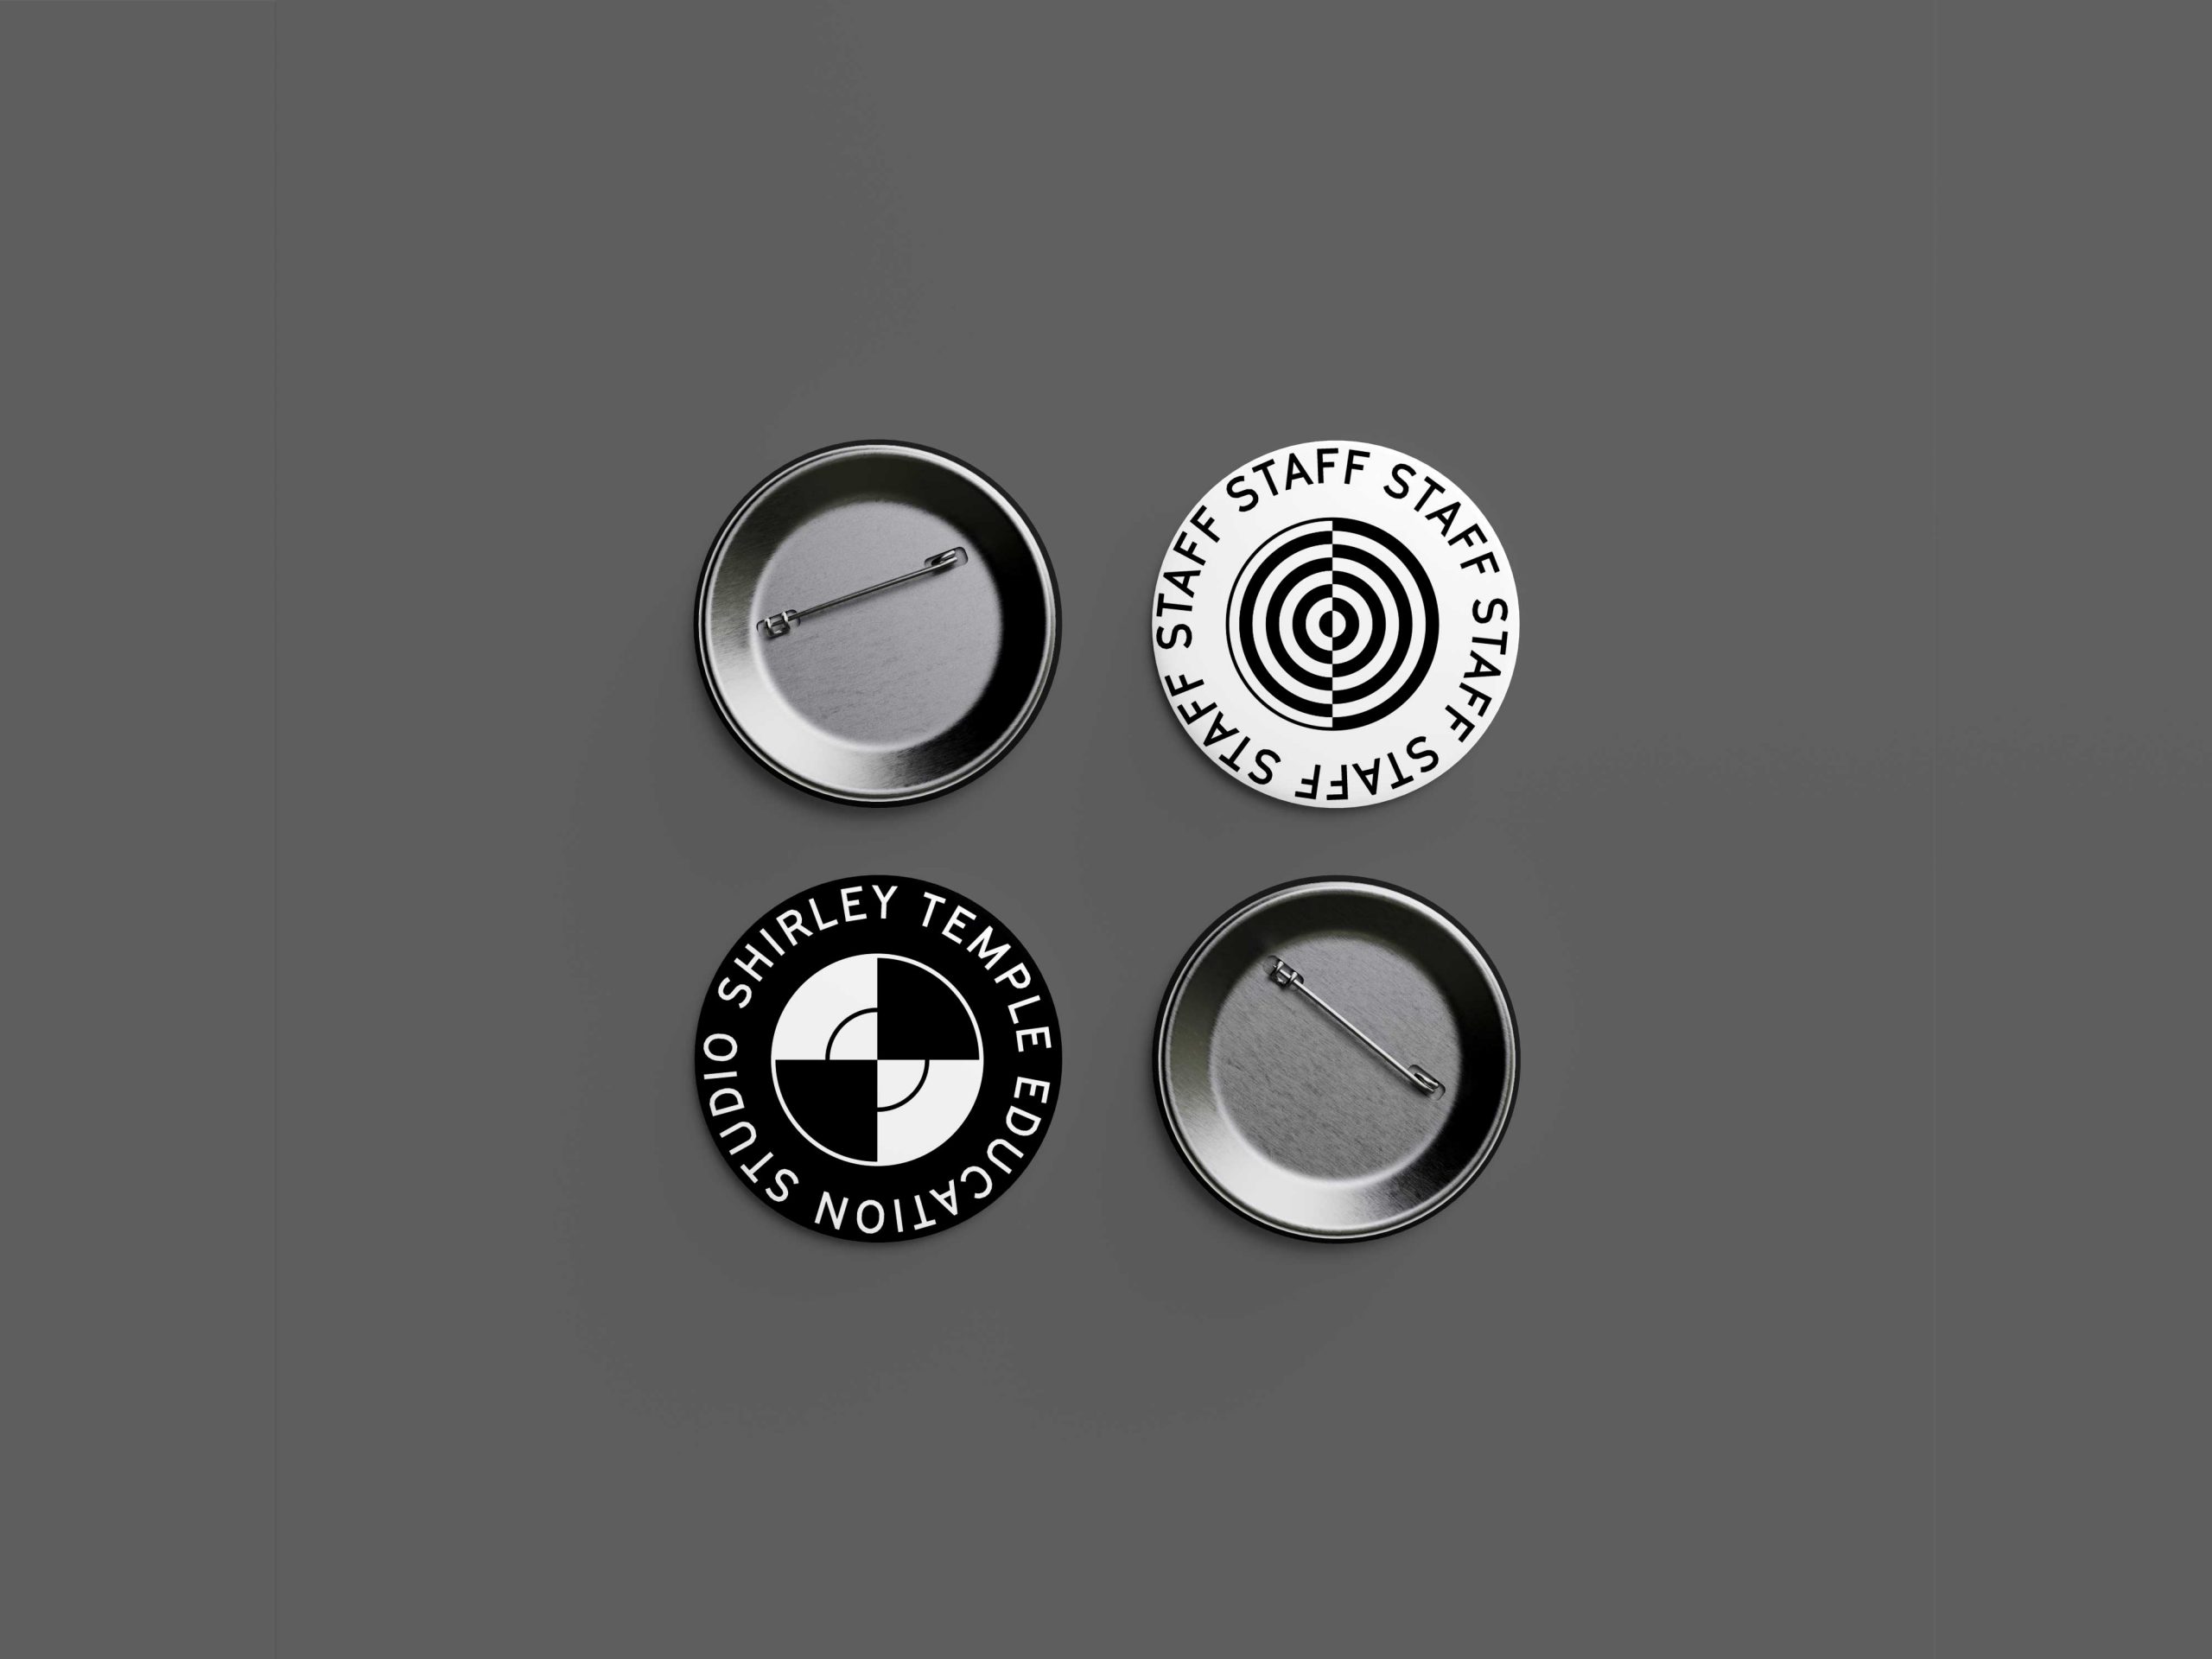 Vedros_AcademyMuseum_Buttons_1